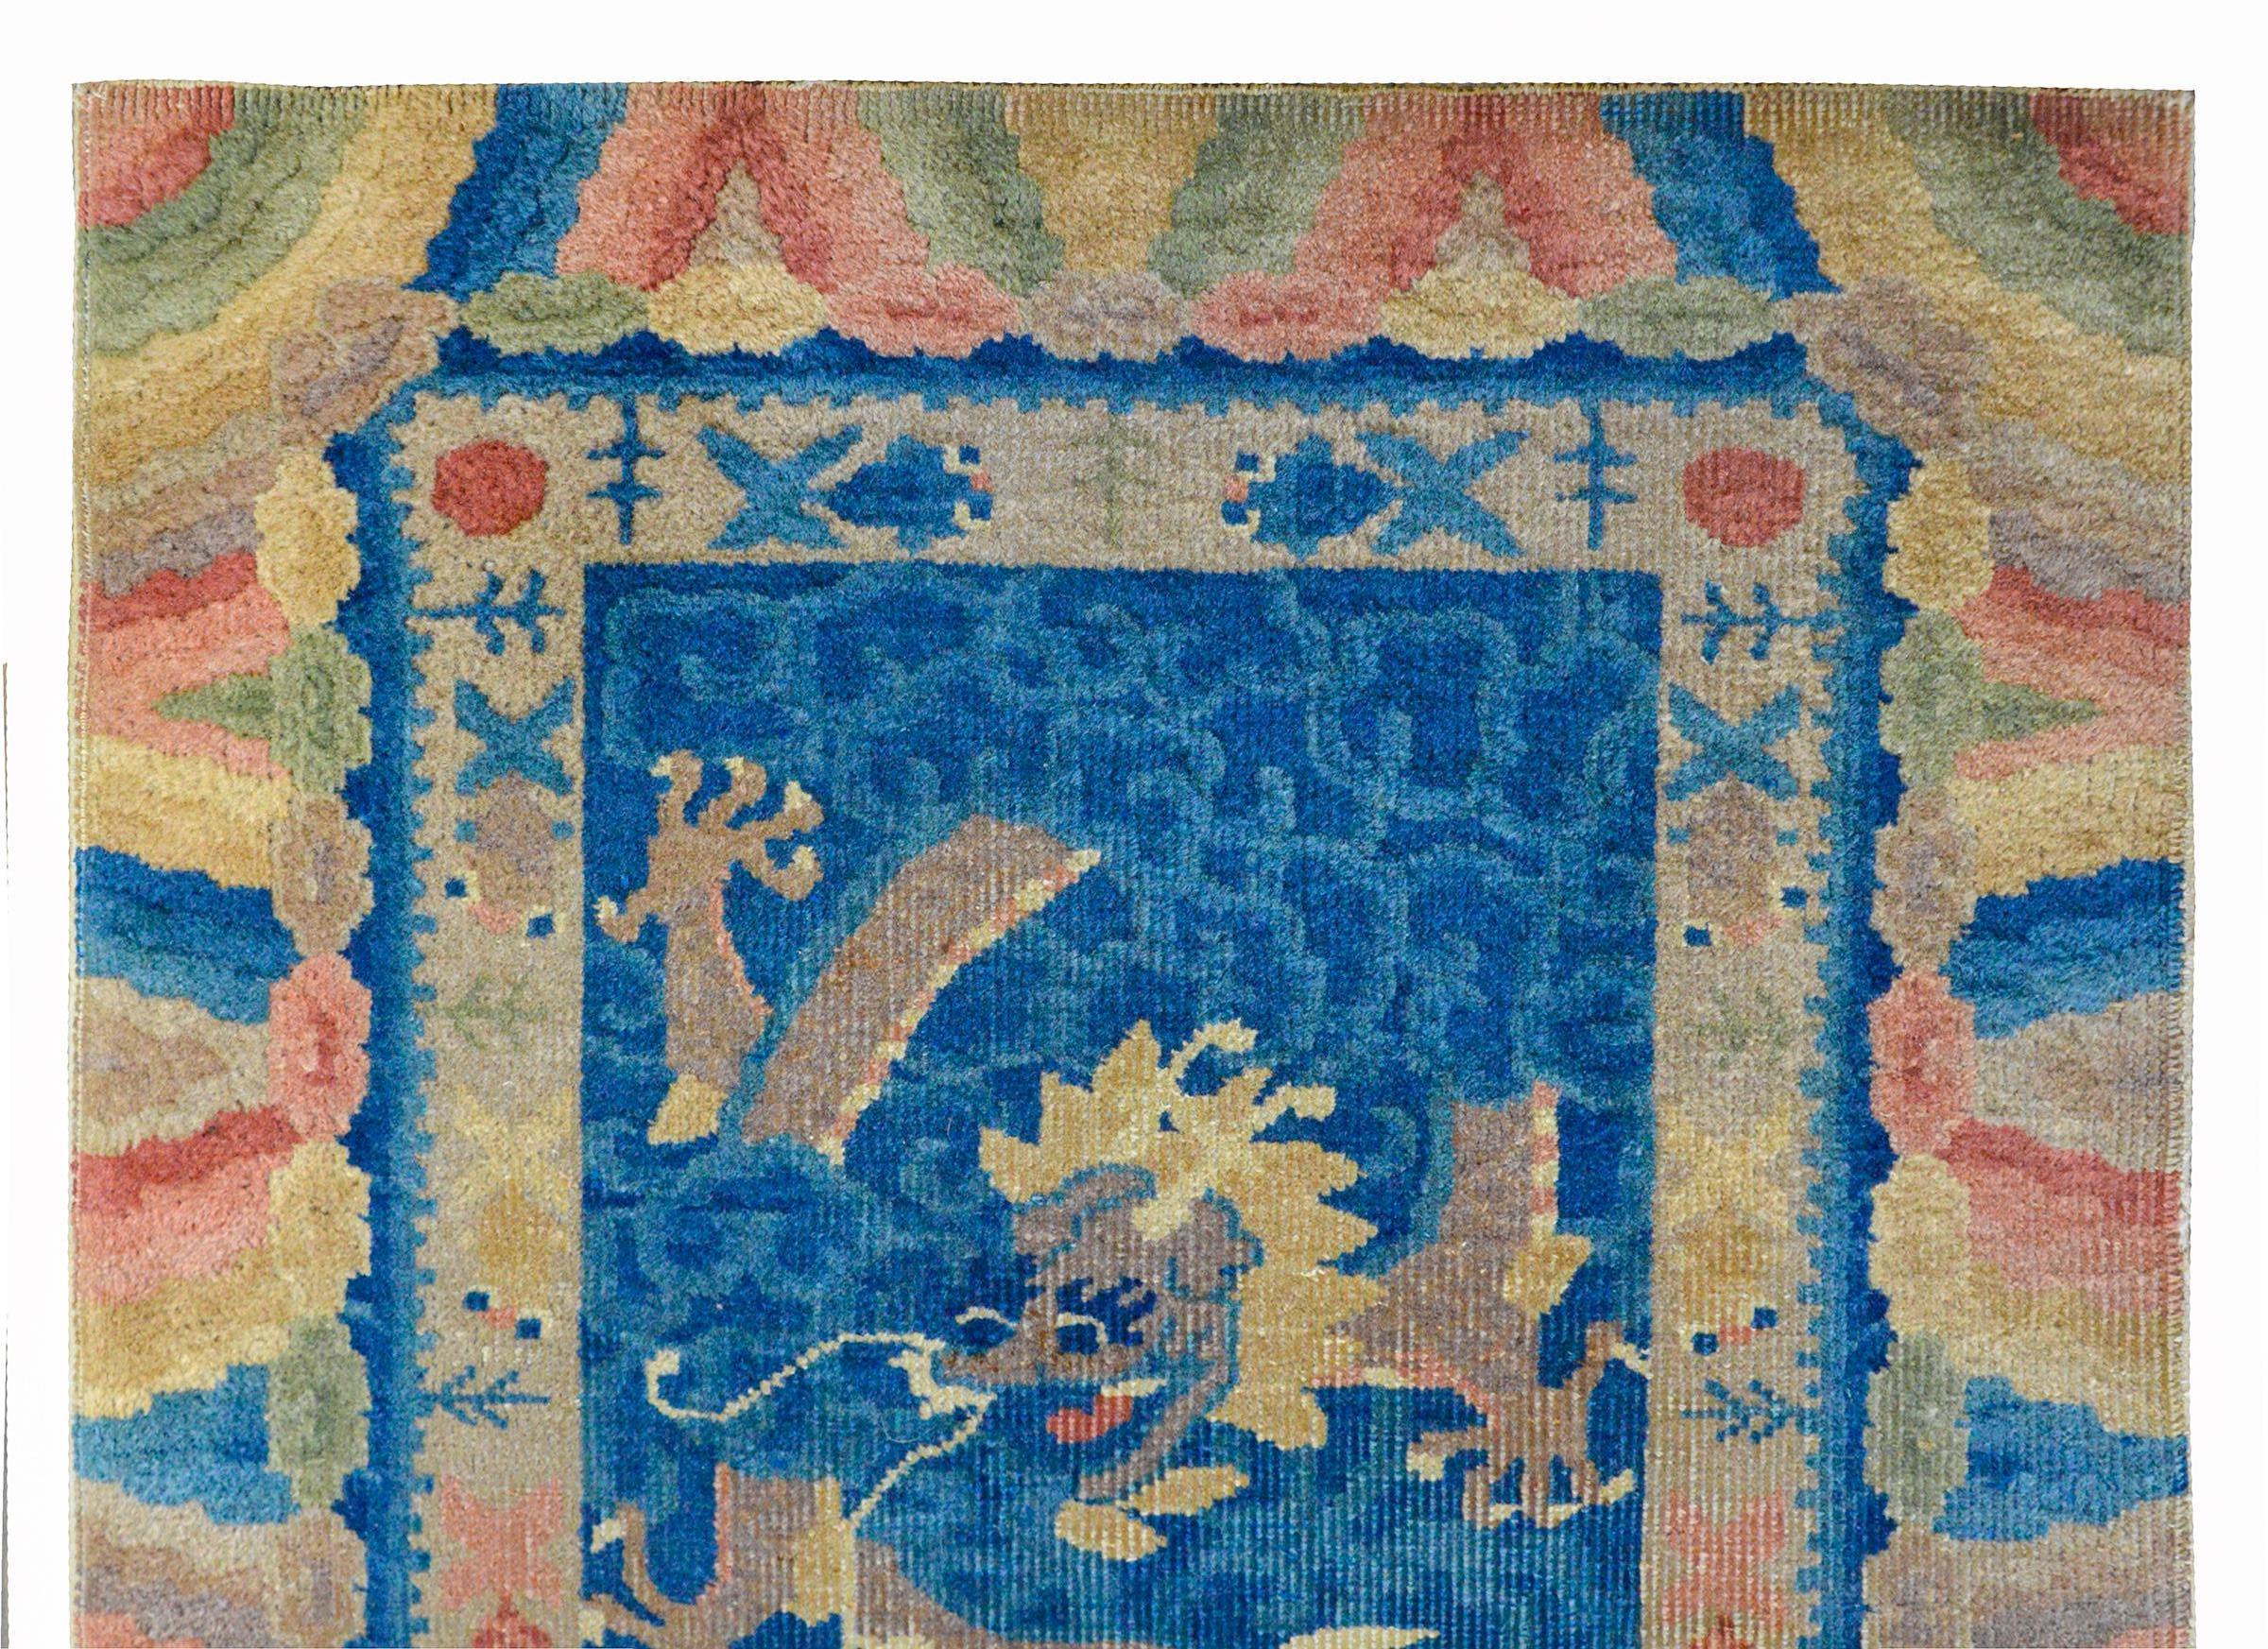 An unusual Chinese Art Deco rug with two contrasting dragons, both peeking out from blowing storm clouds woven in cream and indigo, and surrounded by a border of more multi-colored turbulent storm clouds.